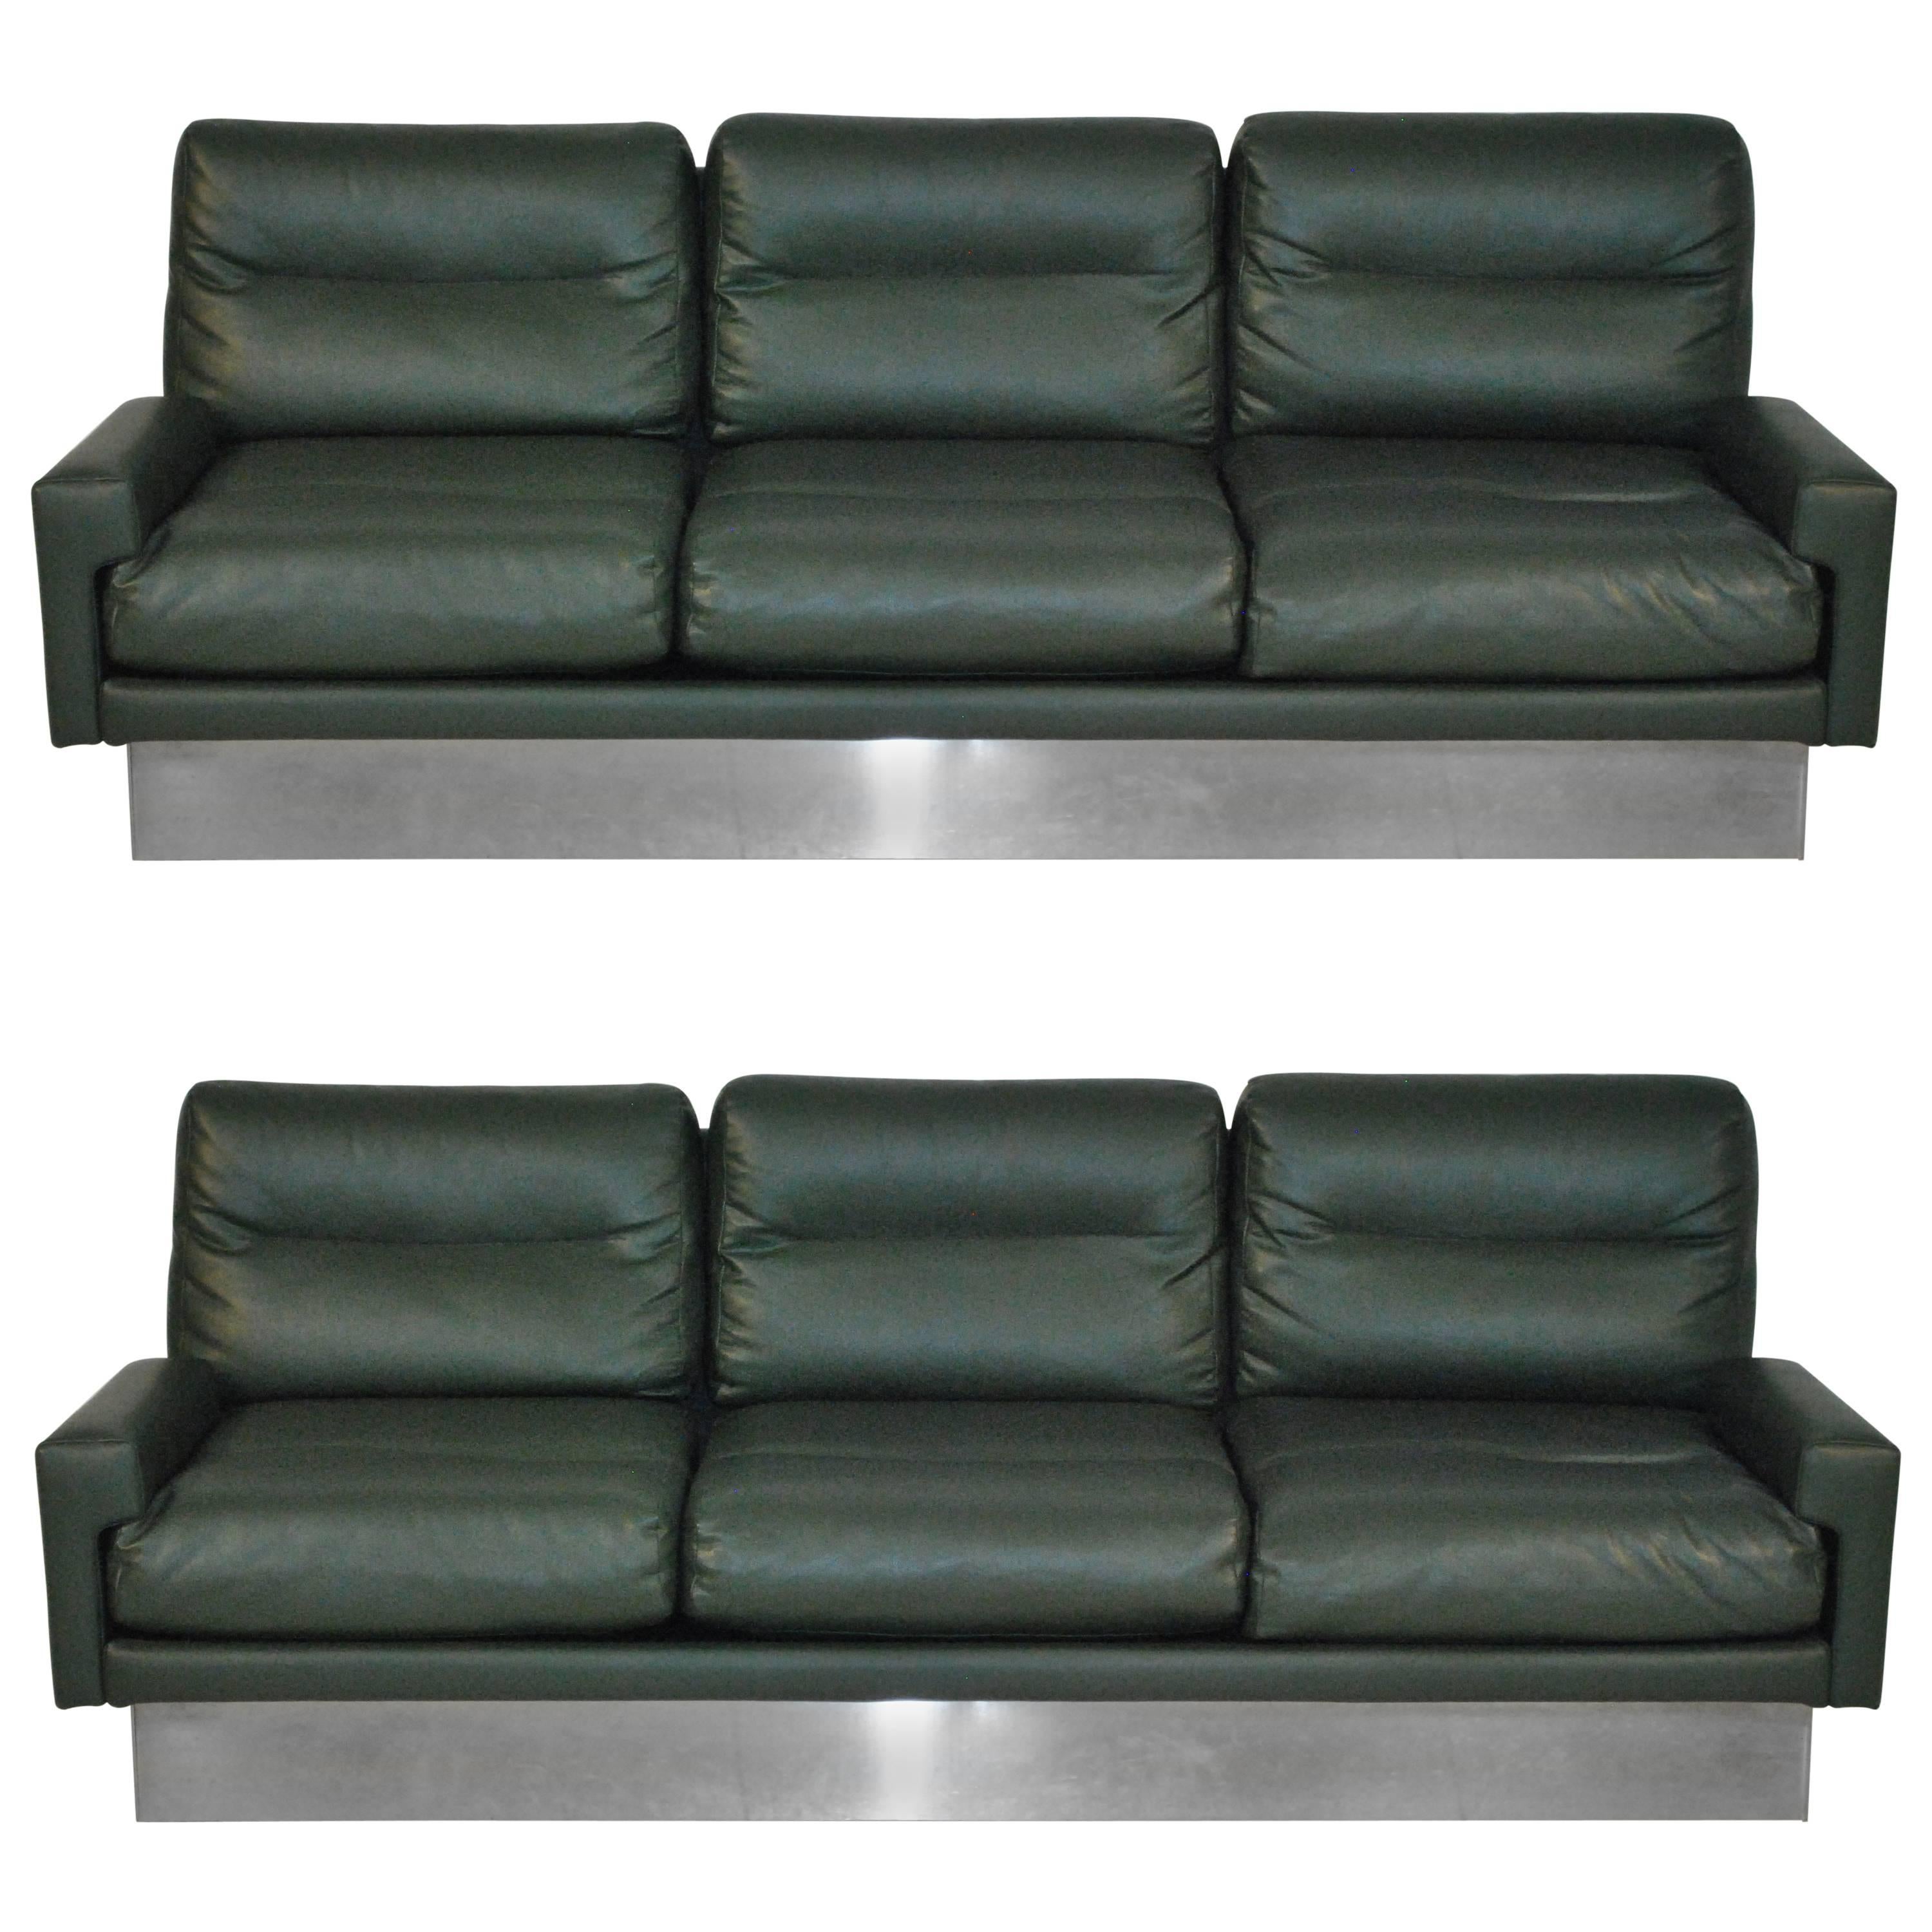 Rare Jacques Charpentier Leather Sofas, France, 1970s For Sale